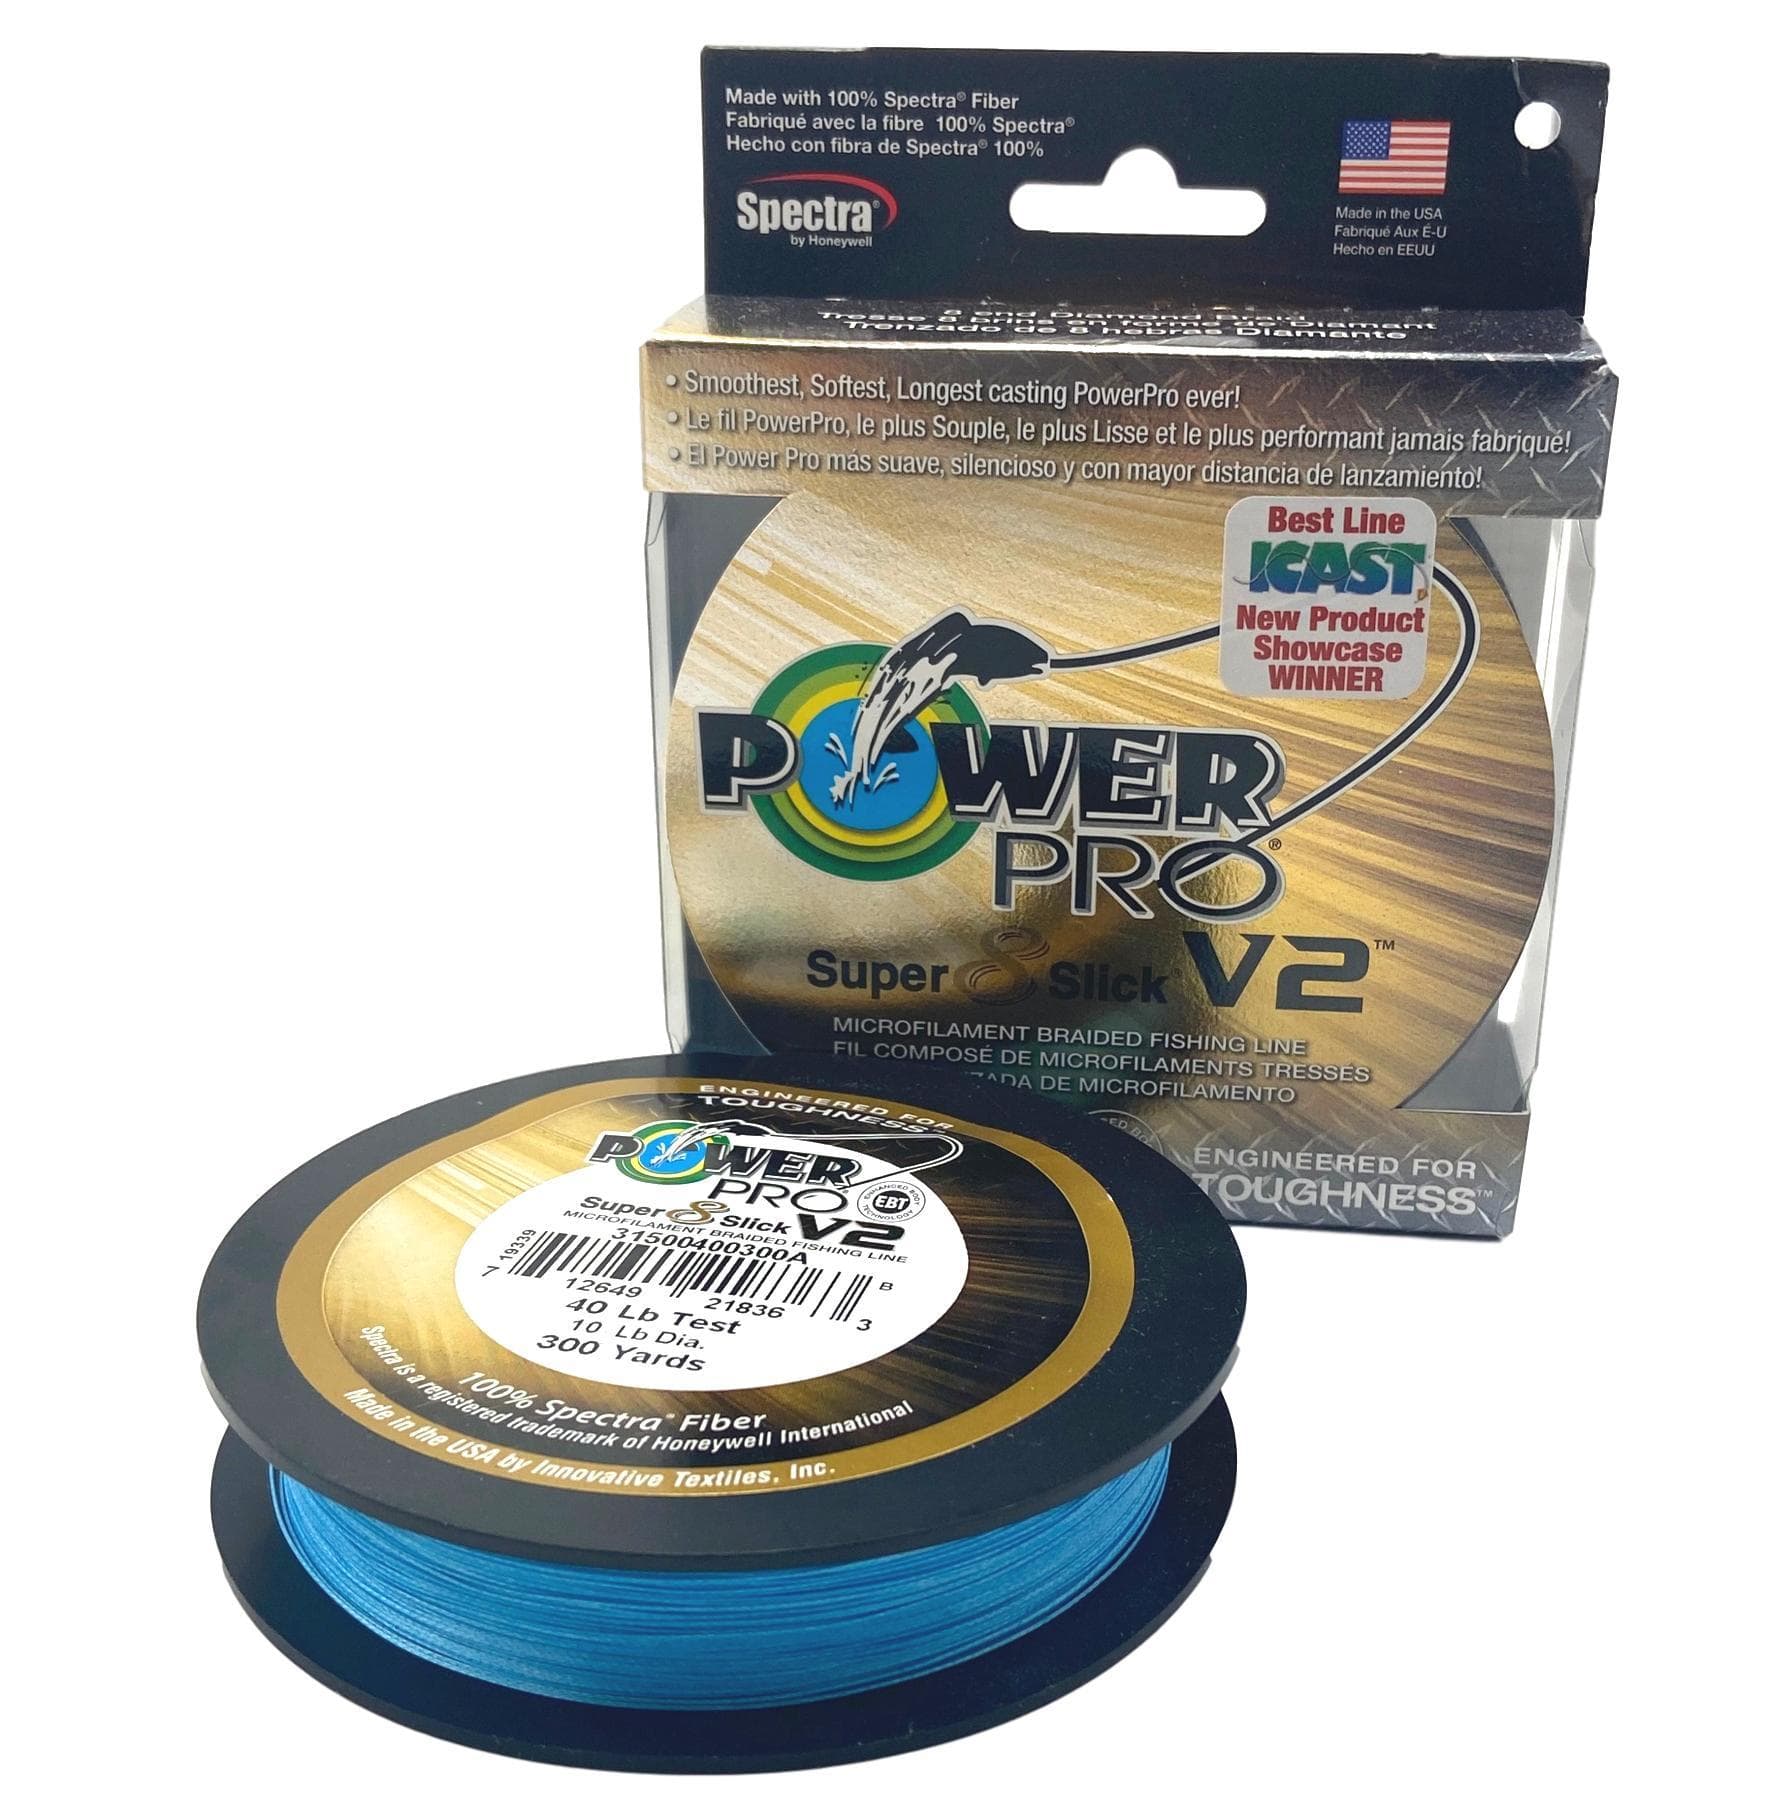 Braided Fishing Line - The Saltwater Edge